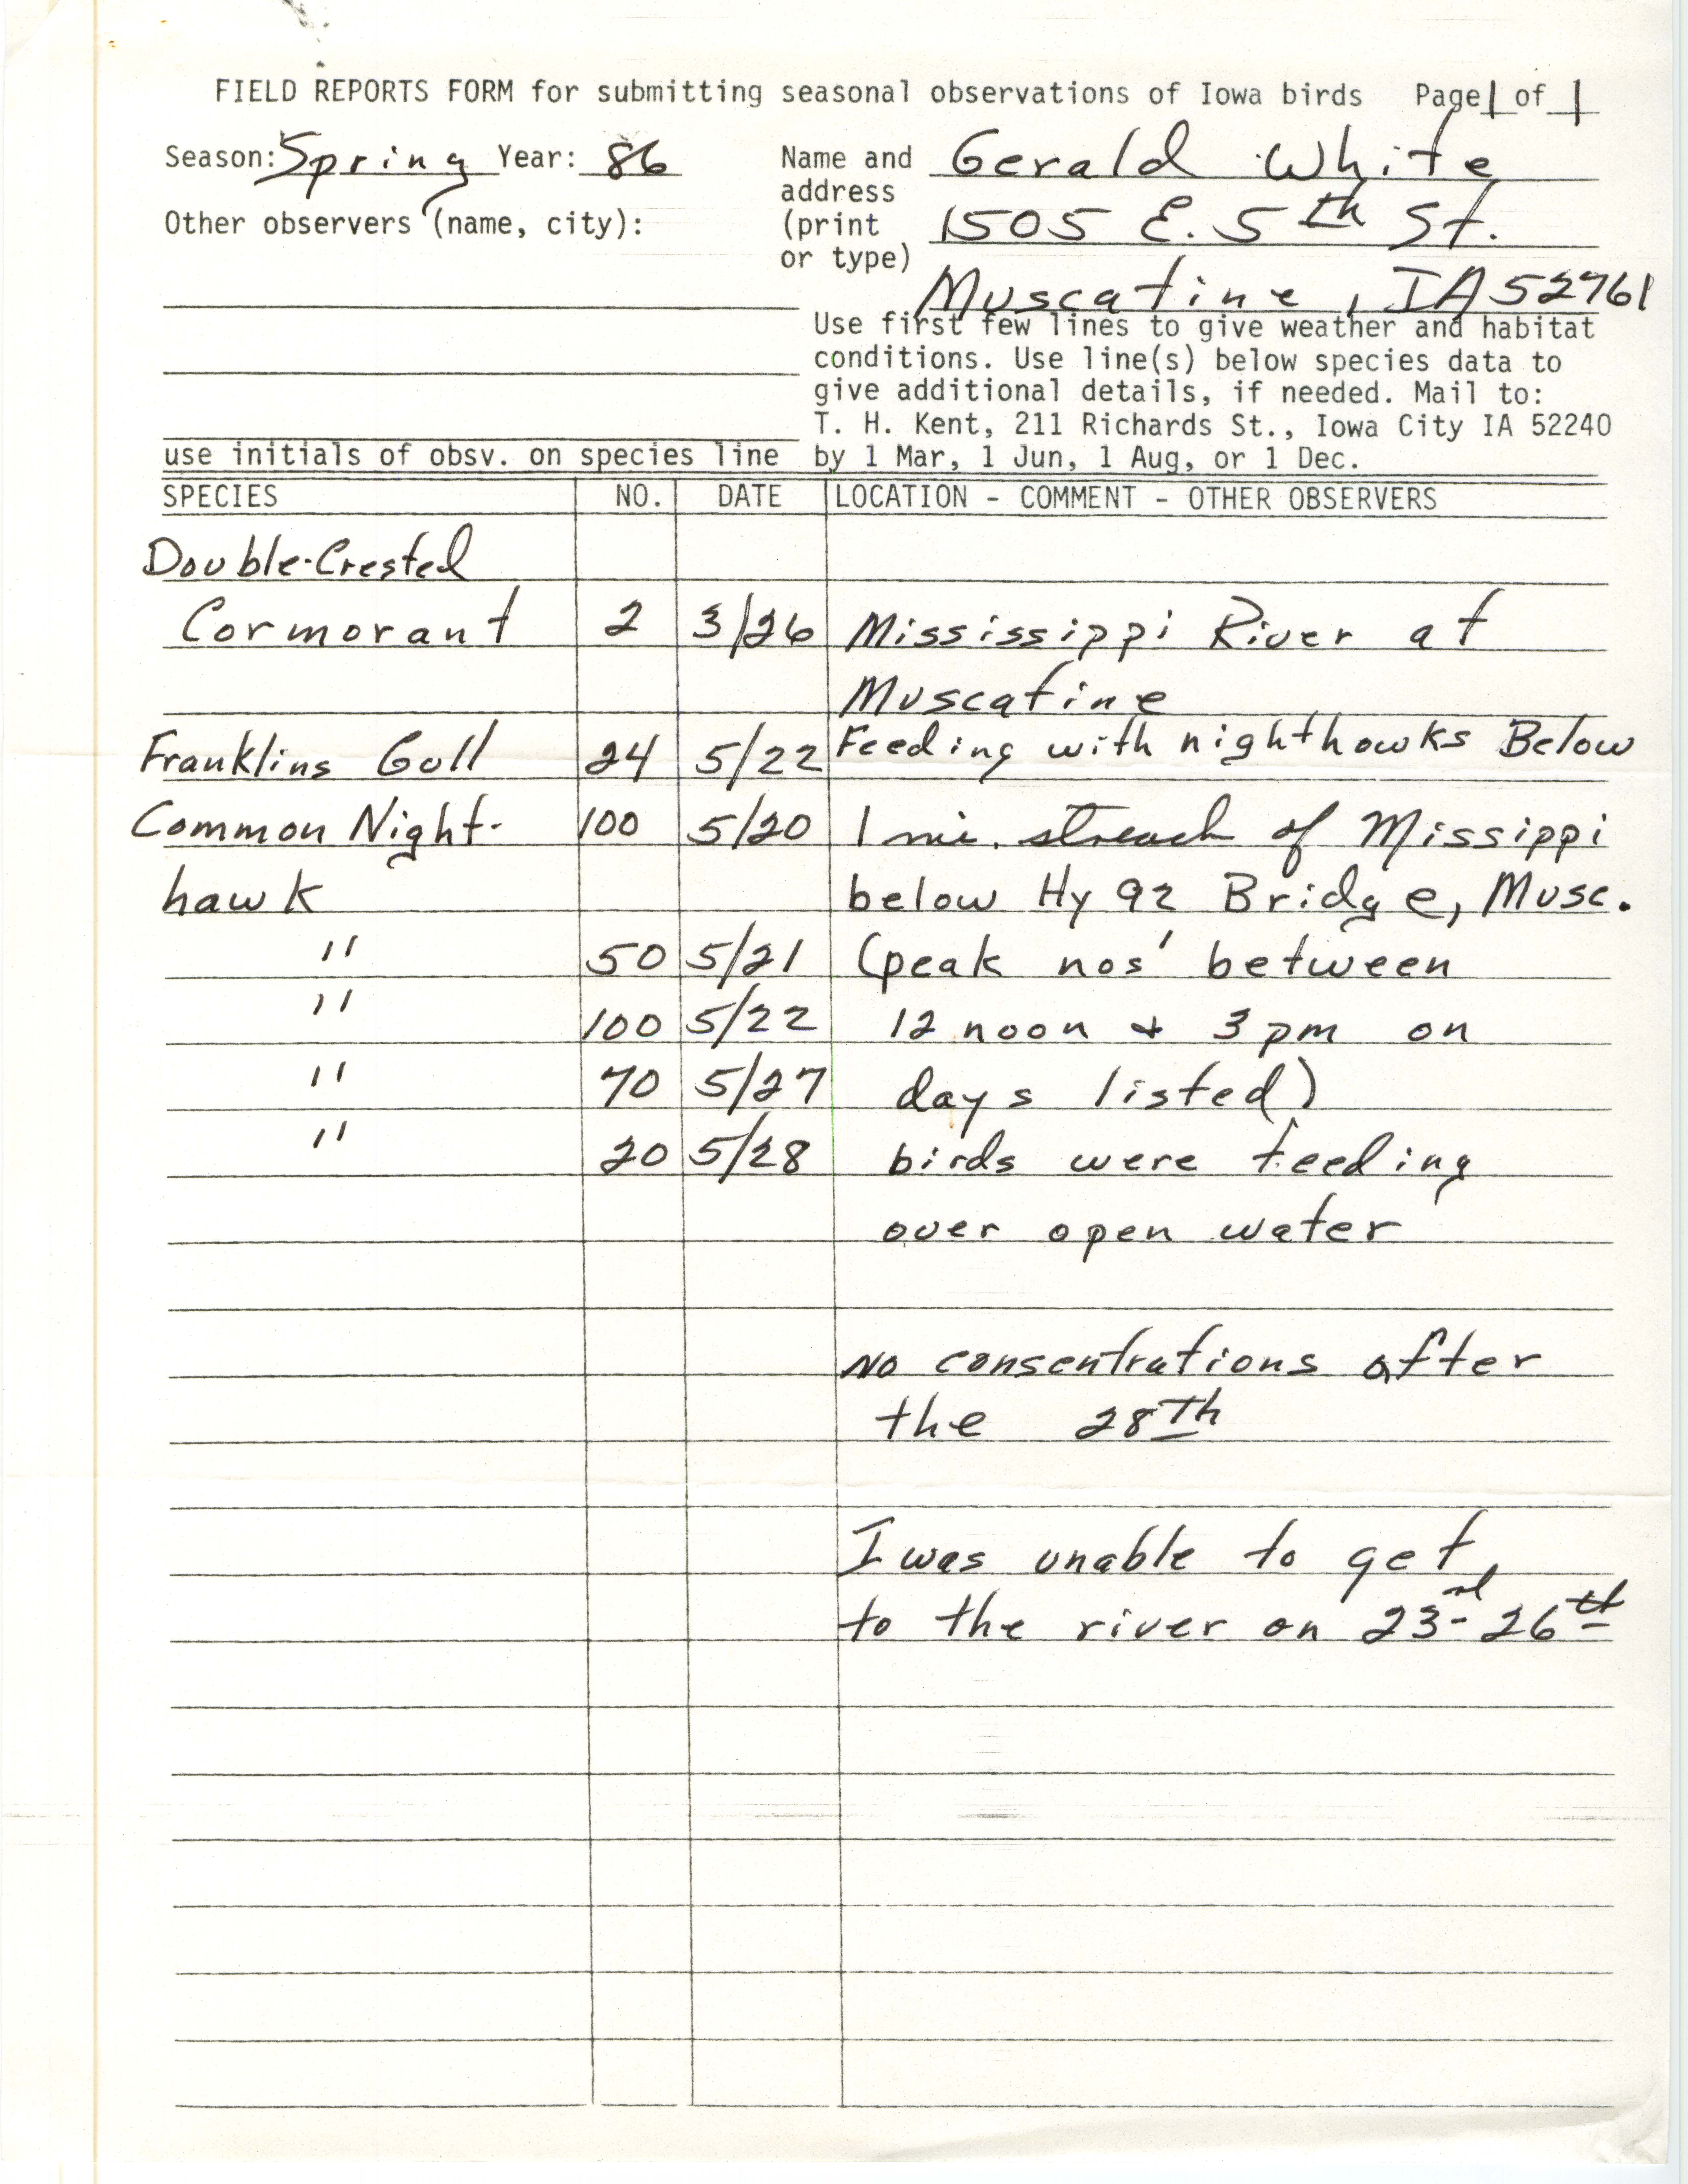 Field reports form for submitting seasonal observations of Iowa birds, Gerald White, Spring 1986